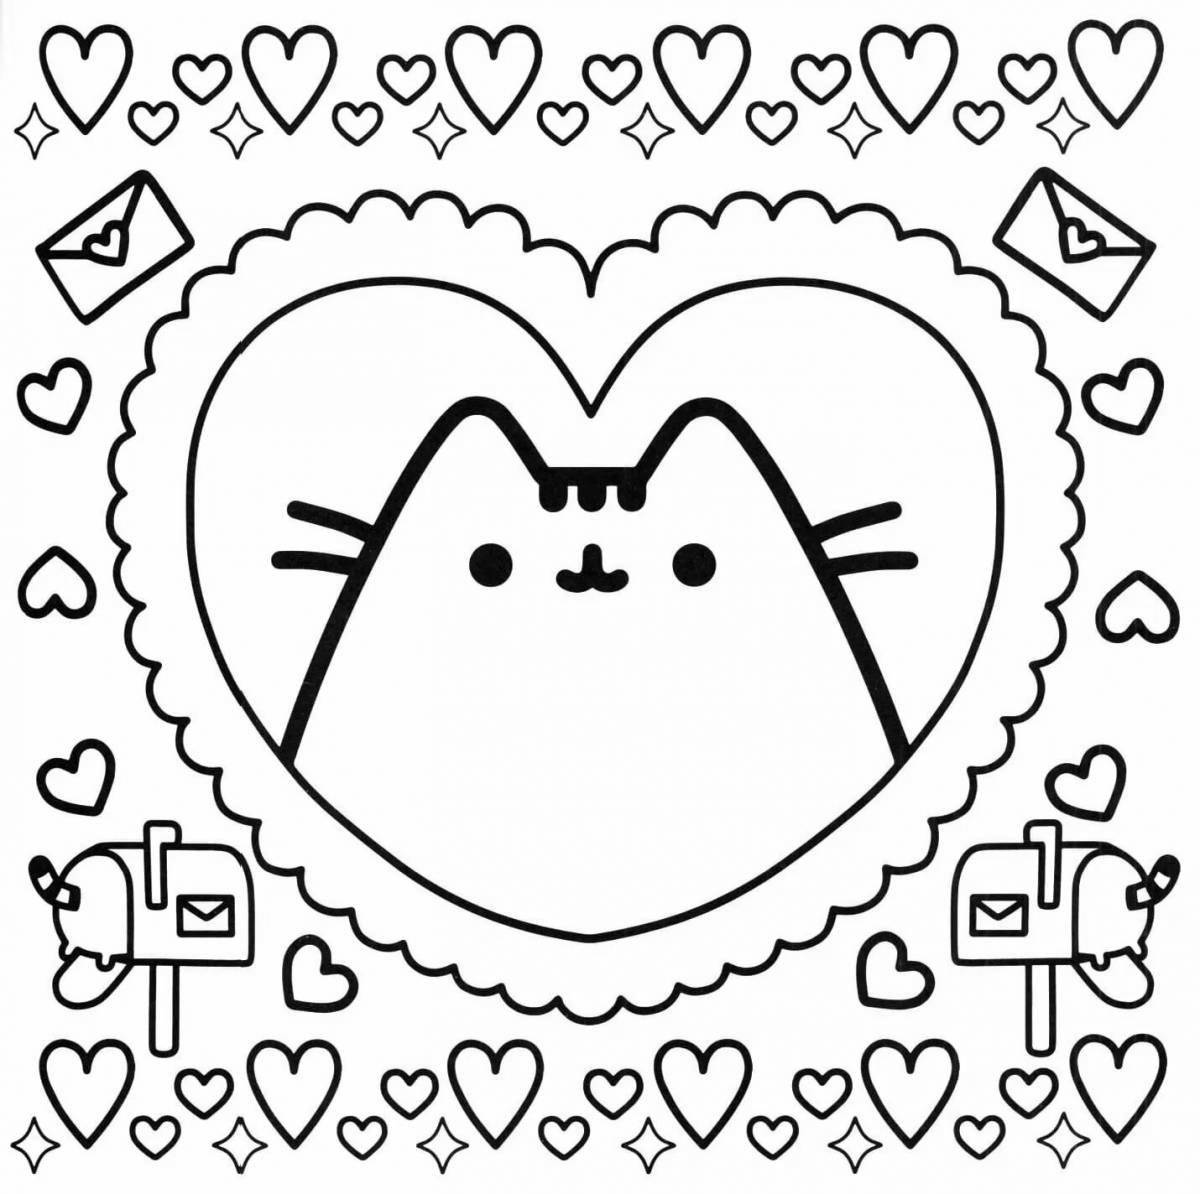 Colouring funny pusheen stickers